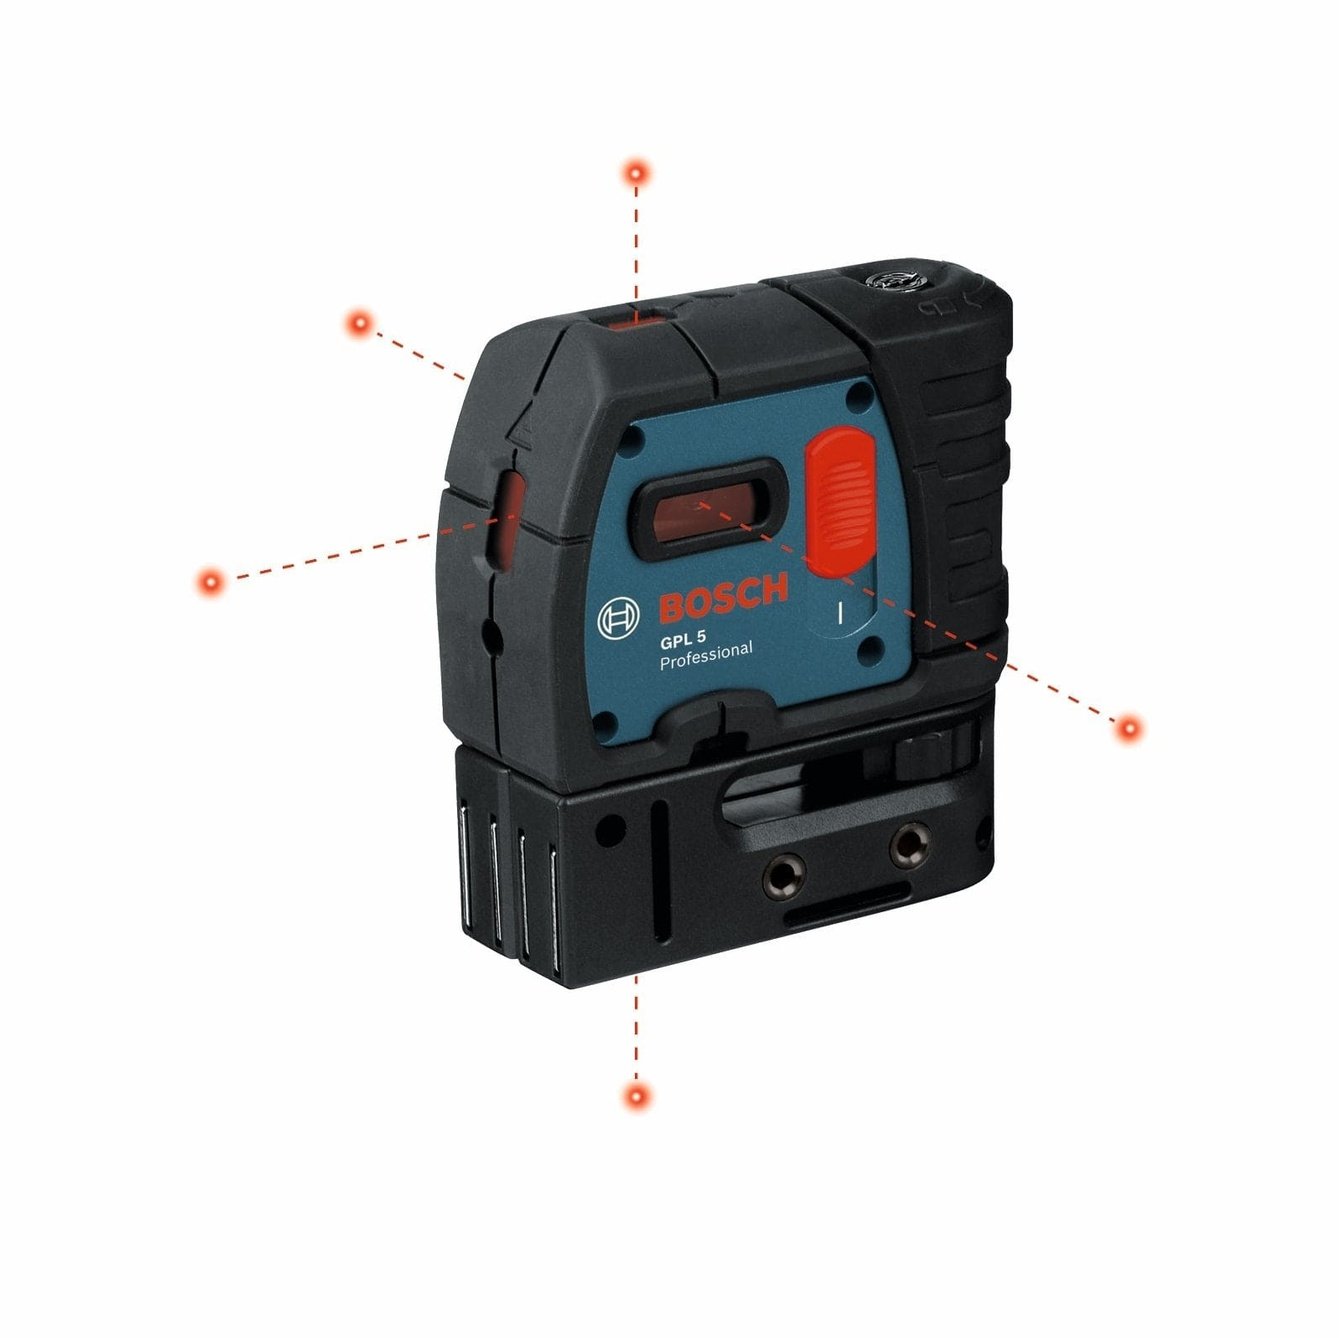 Experience pinpoint accuracy with the Bosch Professional 30m Point Laser Level (GPL 5) at SupplyMaster.store in Ghana. Digital Meter Buy Tools hardware Building materials